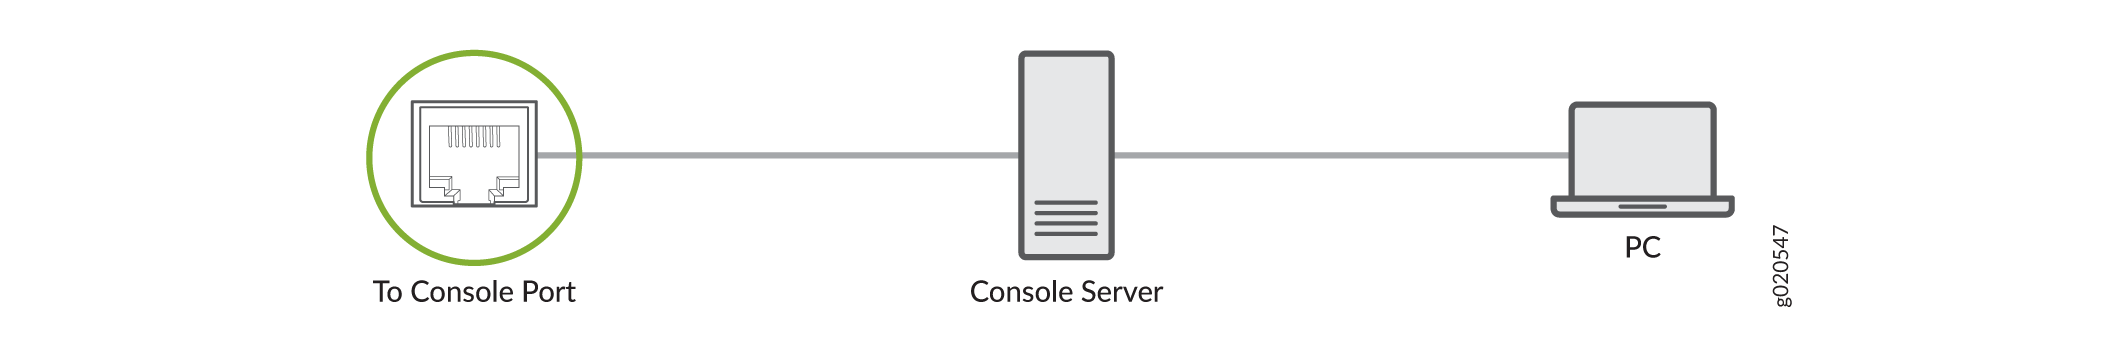 Connect the ACX7332 Router to a Management Console through a Console Server